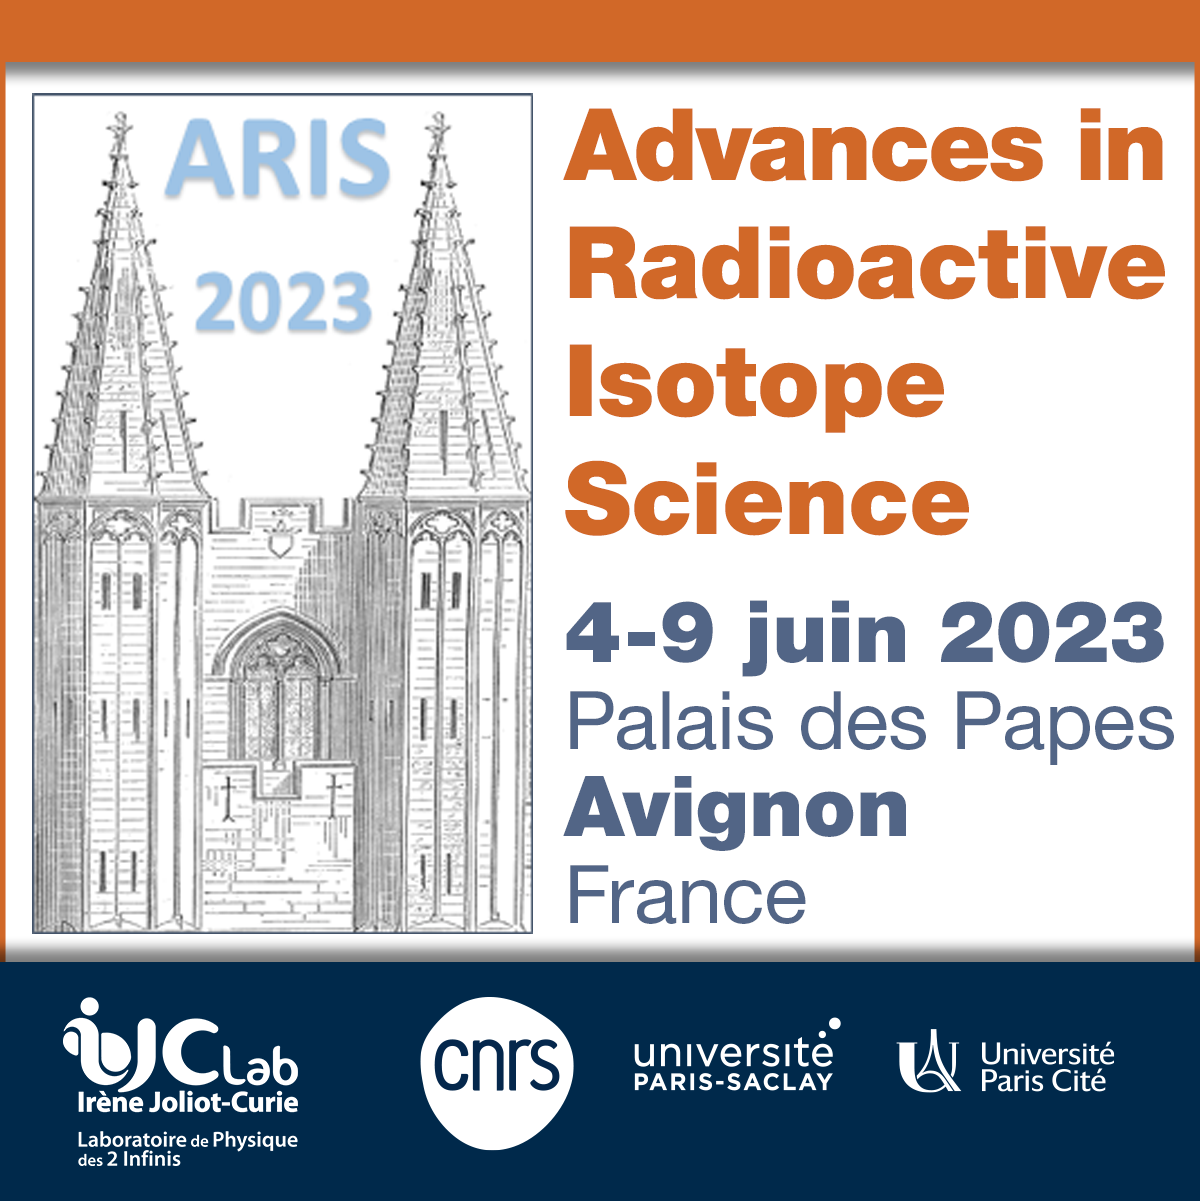 Advances in Radioactive Isotope Science (ARIS 2023)